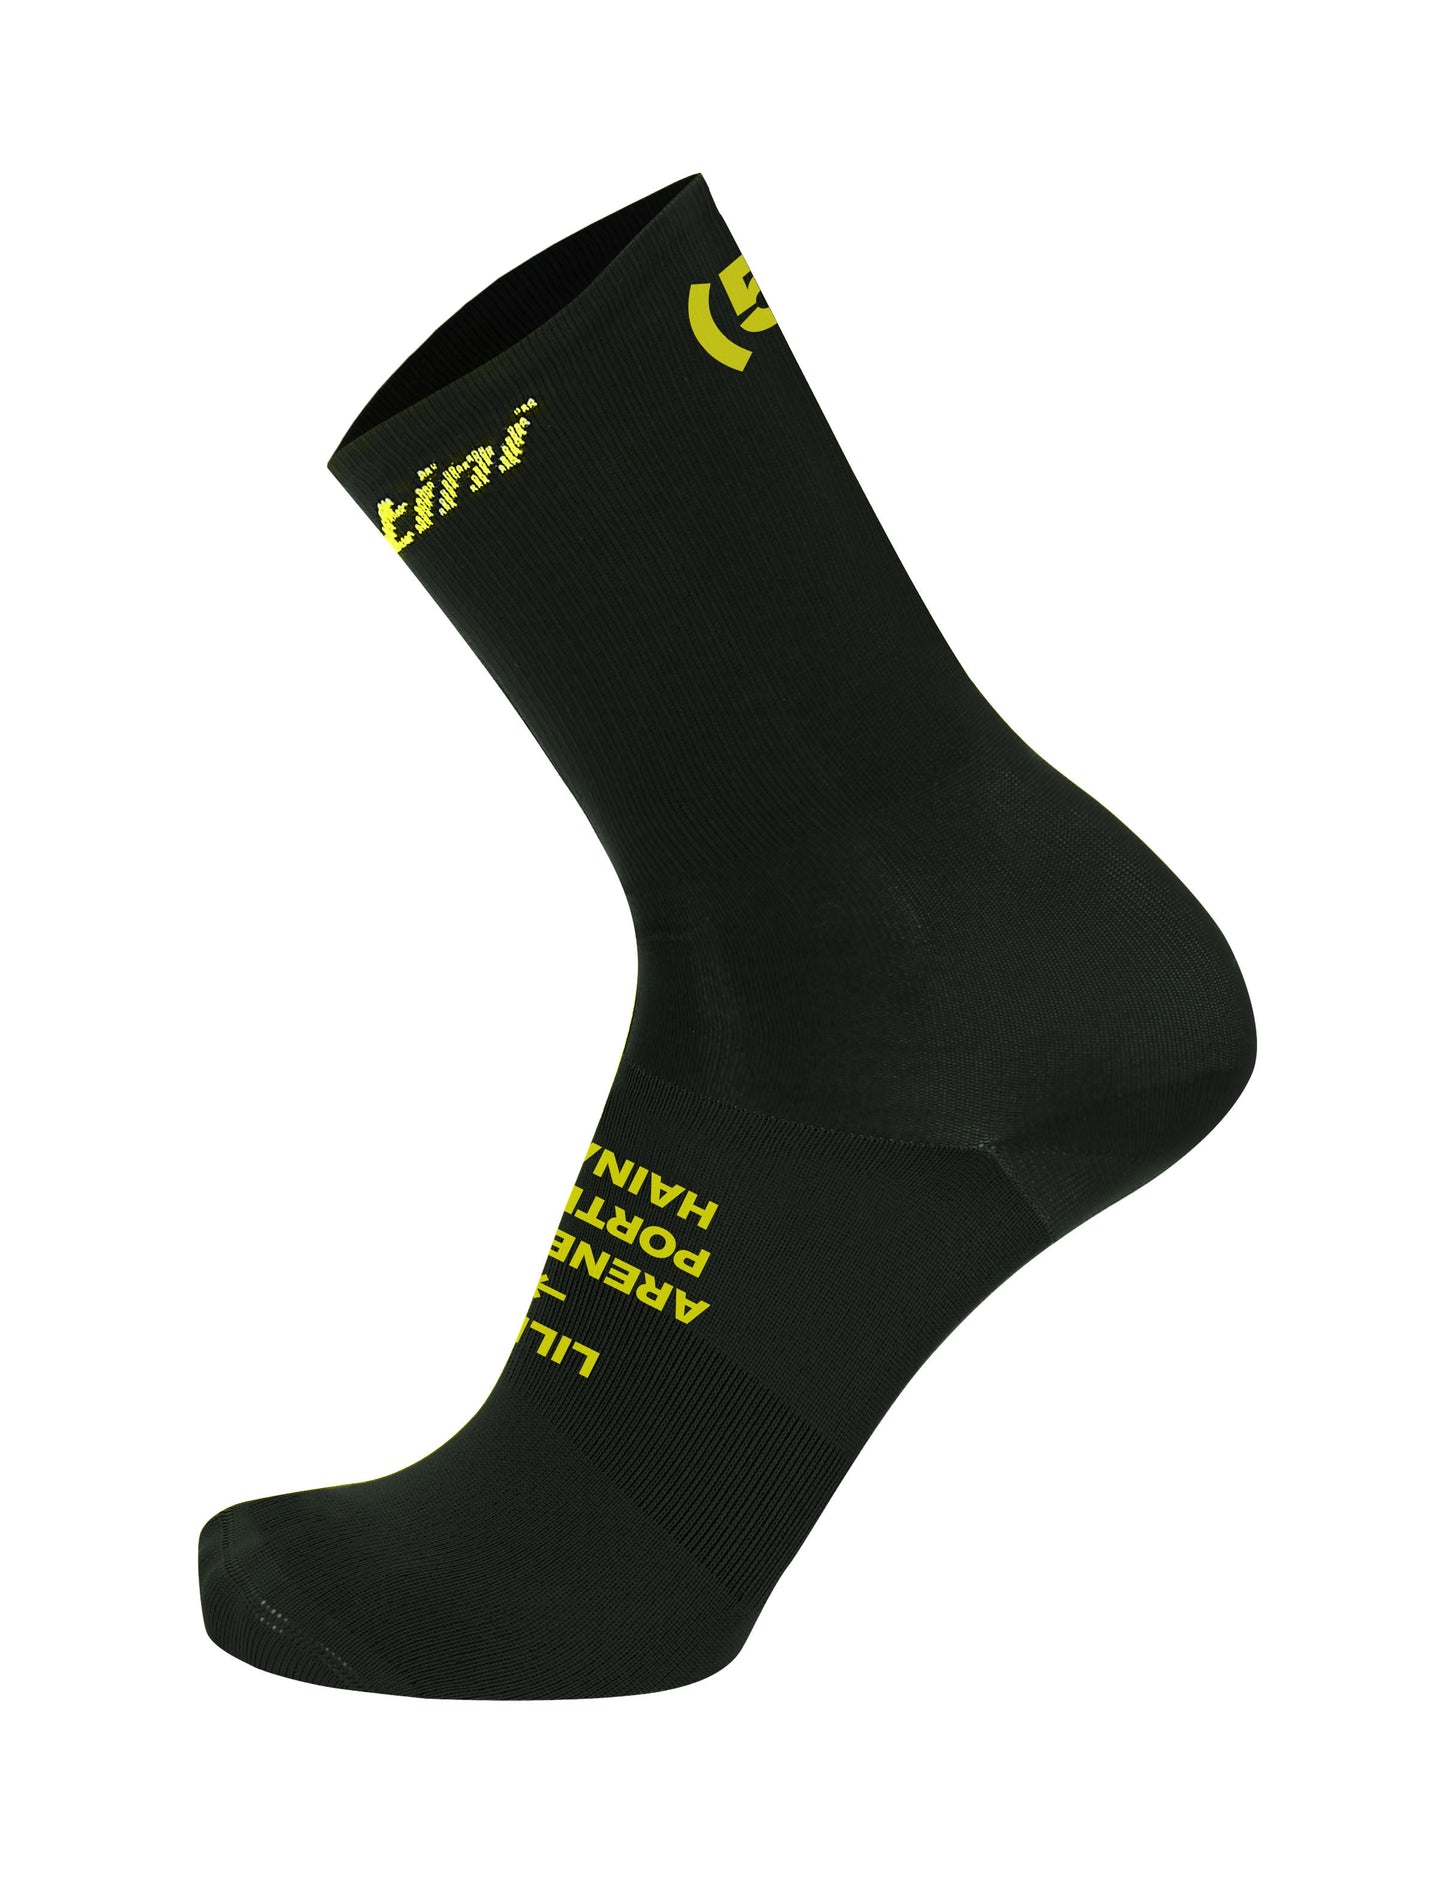 Official 2022 Tour de France Arenberg Socks - by Santini | Cento Cycling